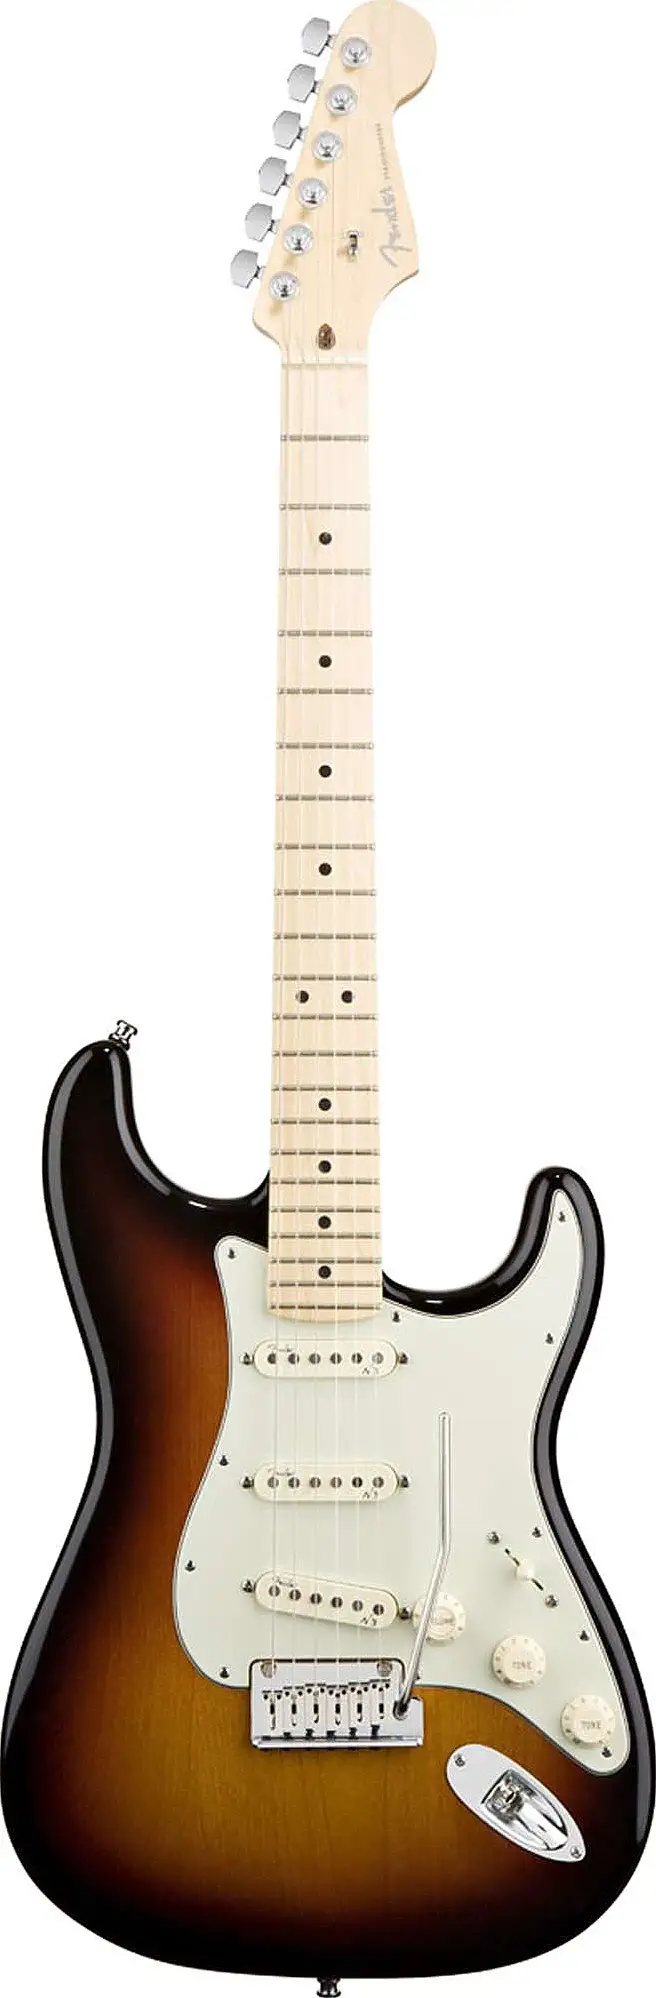 American Deluxe Stratocaster by Fender